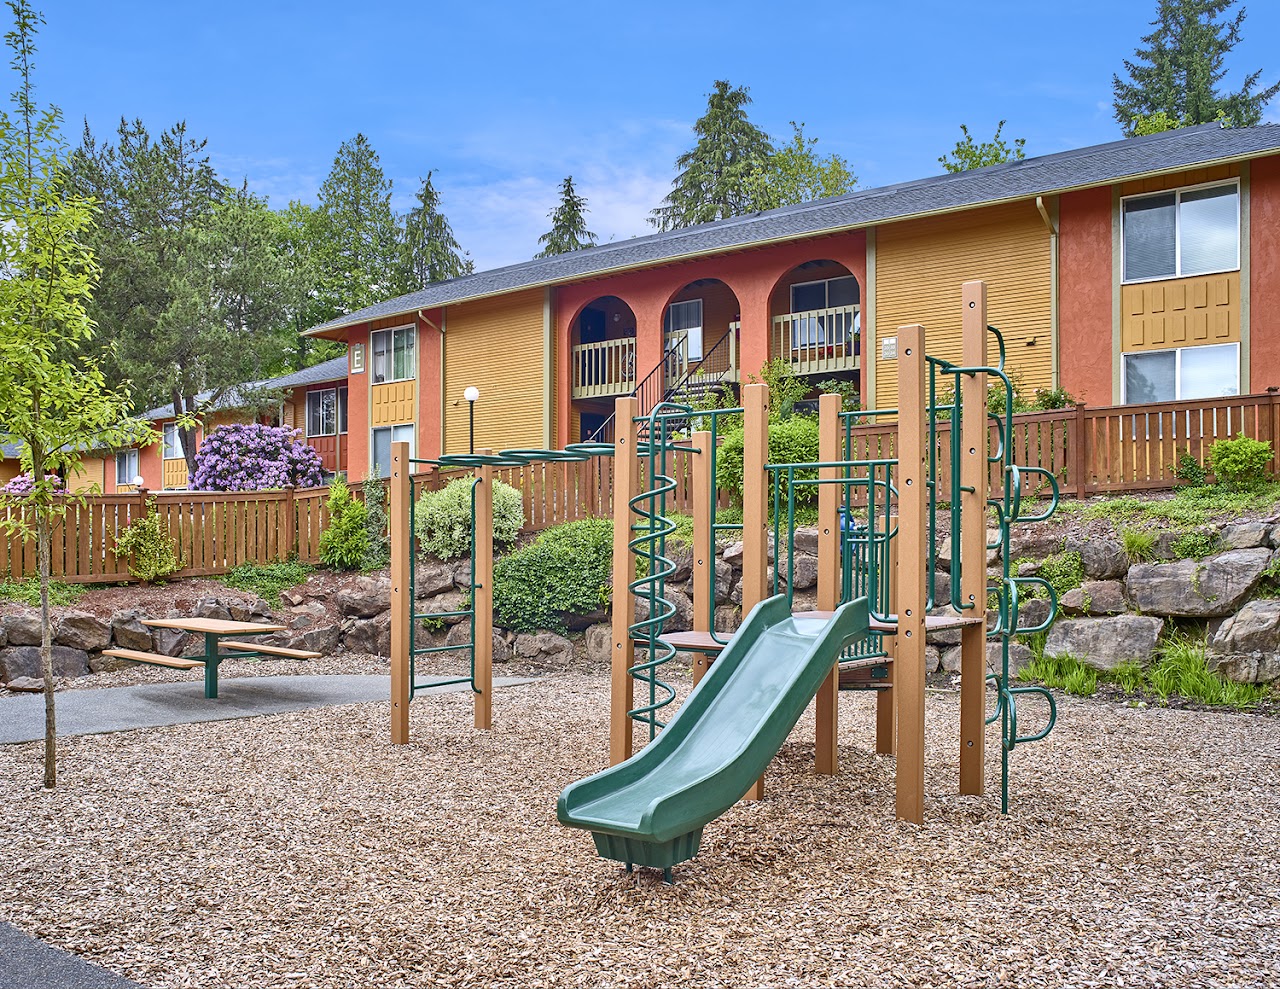 Photo of HERITAGE WOODS APARTMENTS. Affordable housing located at 16518 NE 91ST ST REDMOND, WA 98052